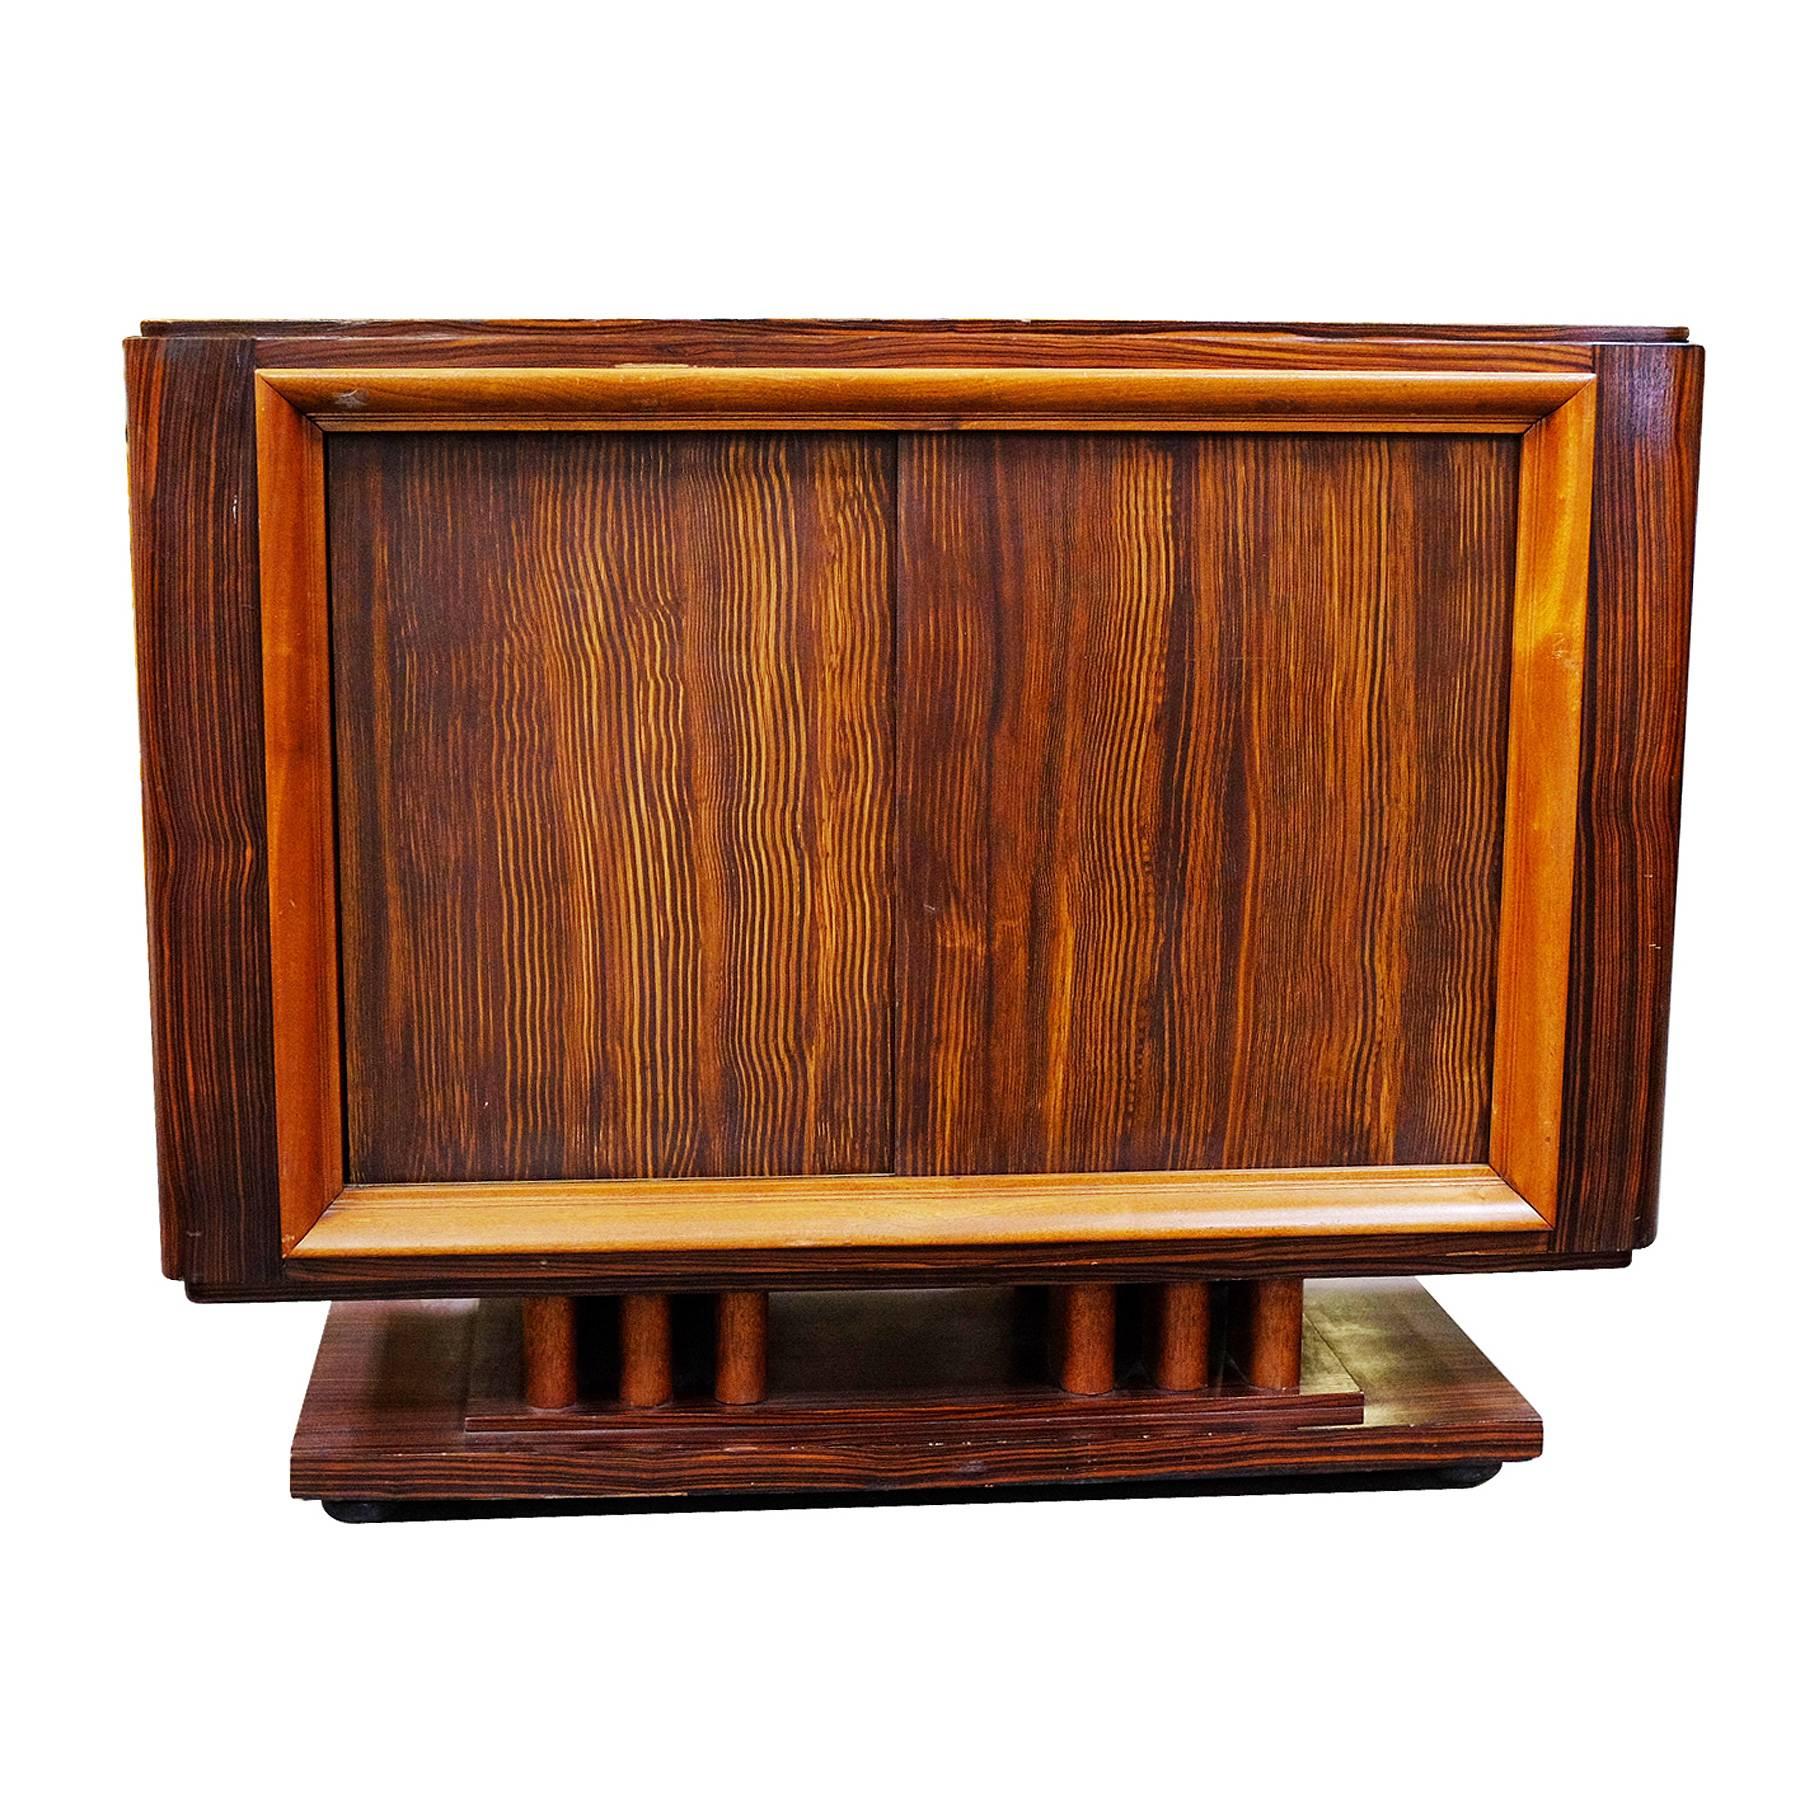 Rare Geometric Art Deco credenza with a dark stained Macassar veneer and two combed wood siding doors opening to a storage space. On the interior you will find bright maple wood lining with adjustable selving. 

The exterior has great early